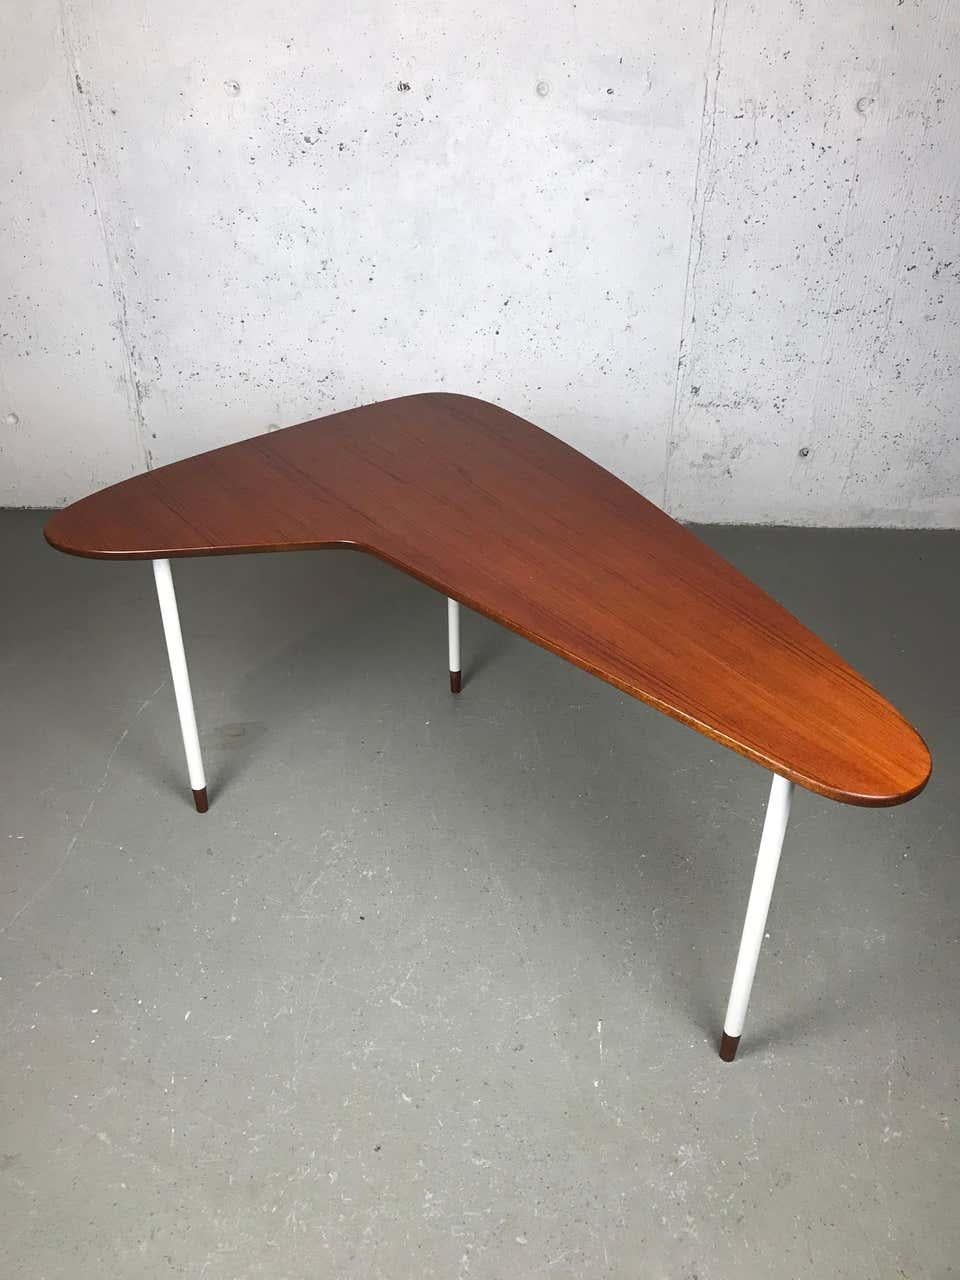 Minimalist boomerang shaped coffee or side table with a thick teak top and a walnut bottom. This piece shows many signs of quality construction. It has a thick teak top with walnut veneer underneath, as well as etched or routed grooves so the legs